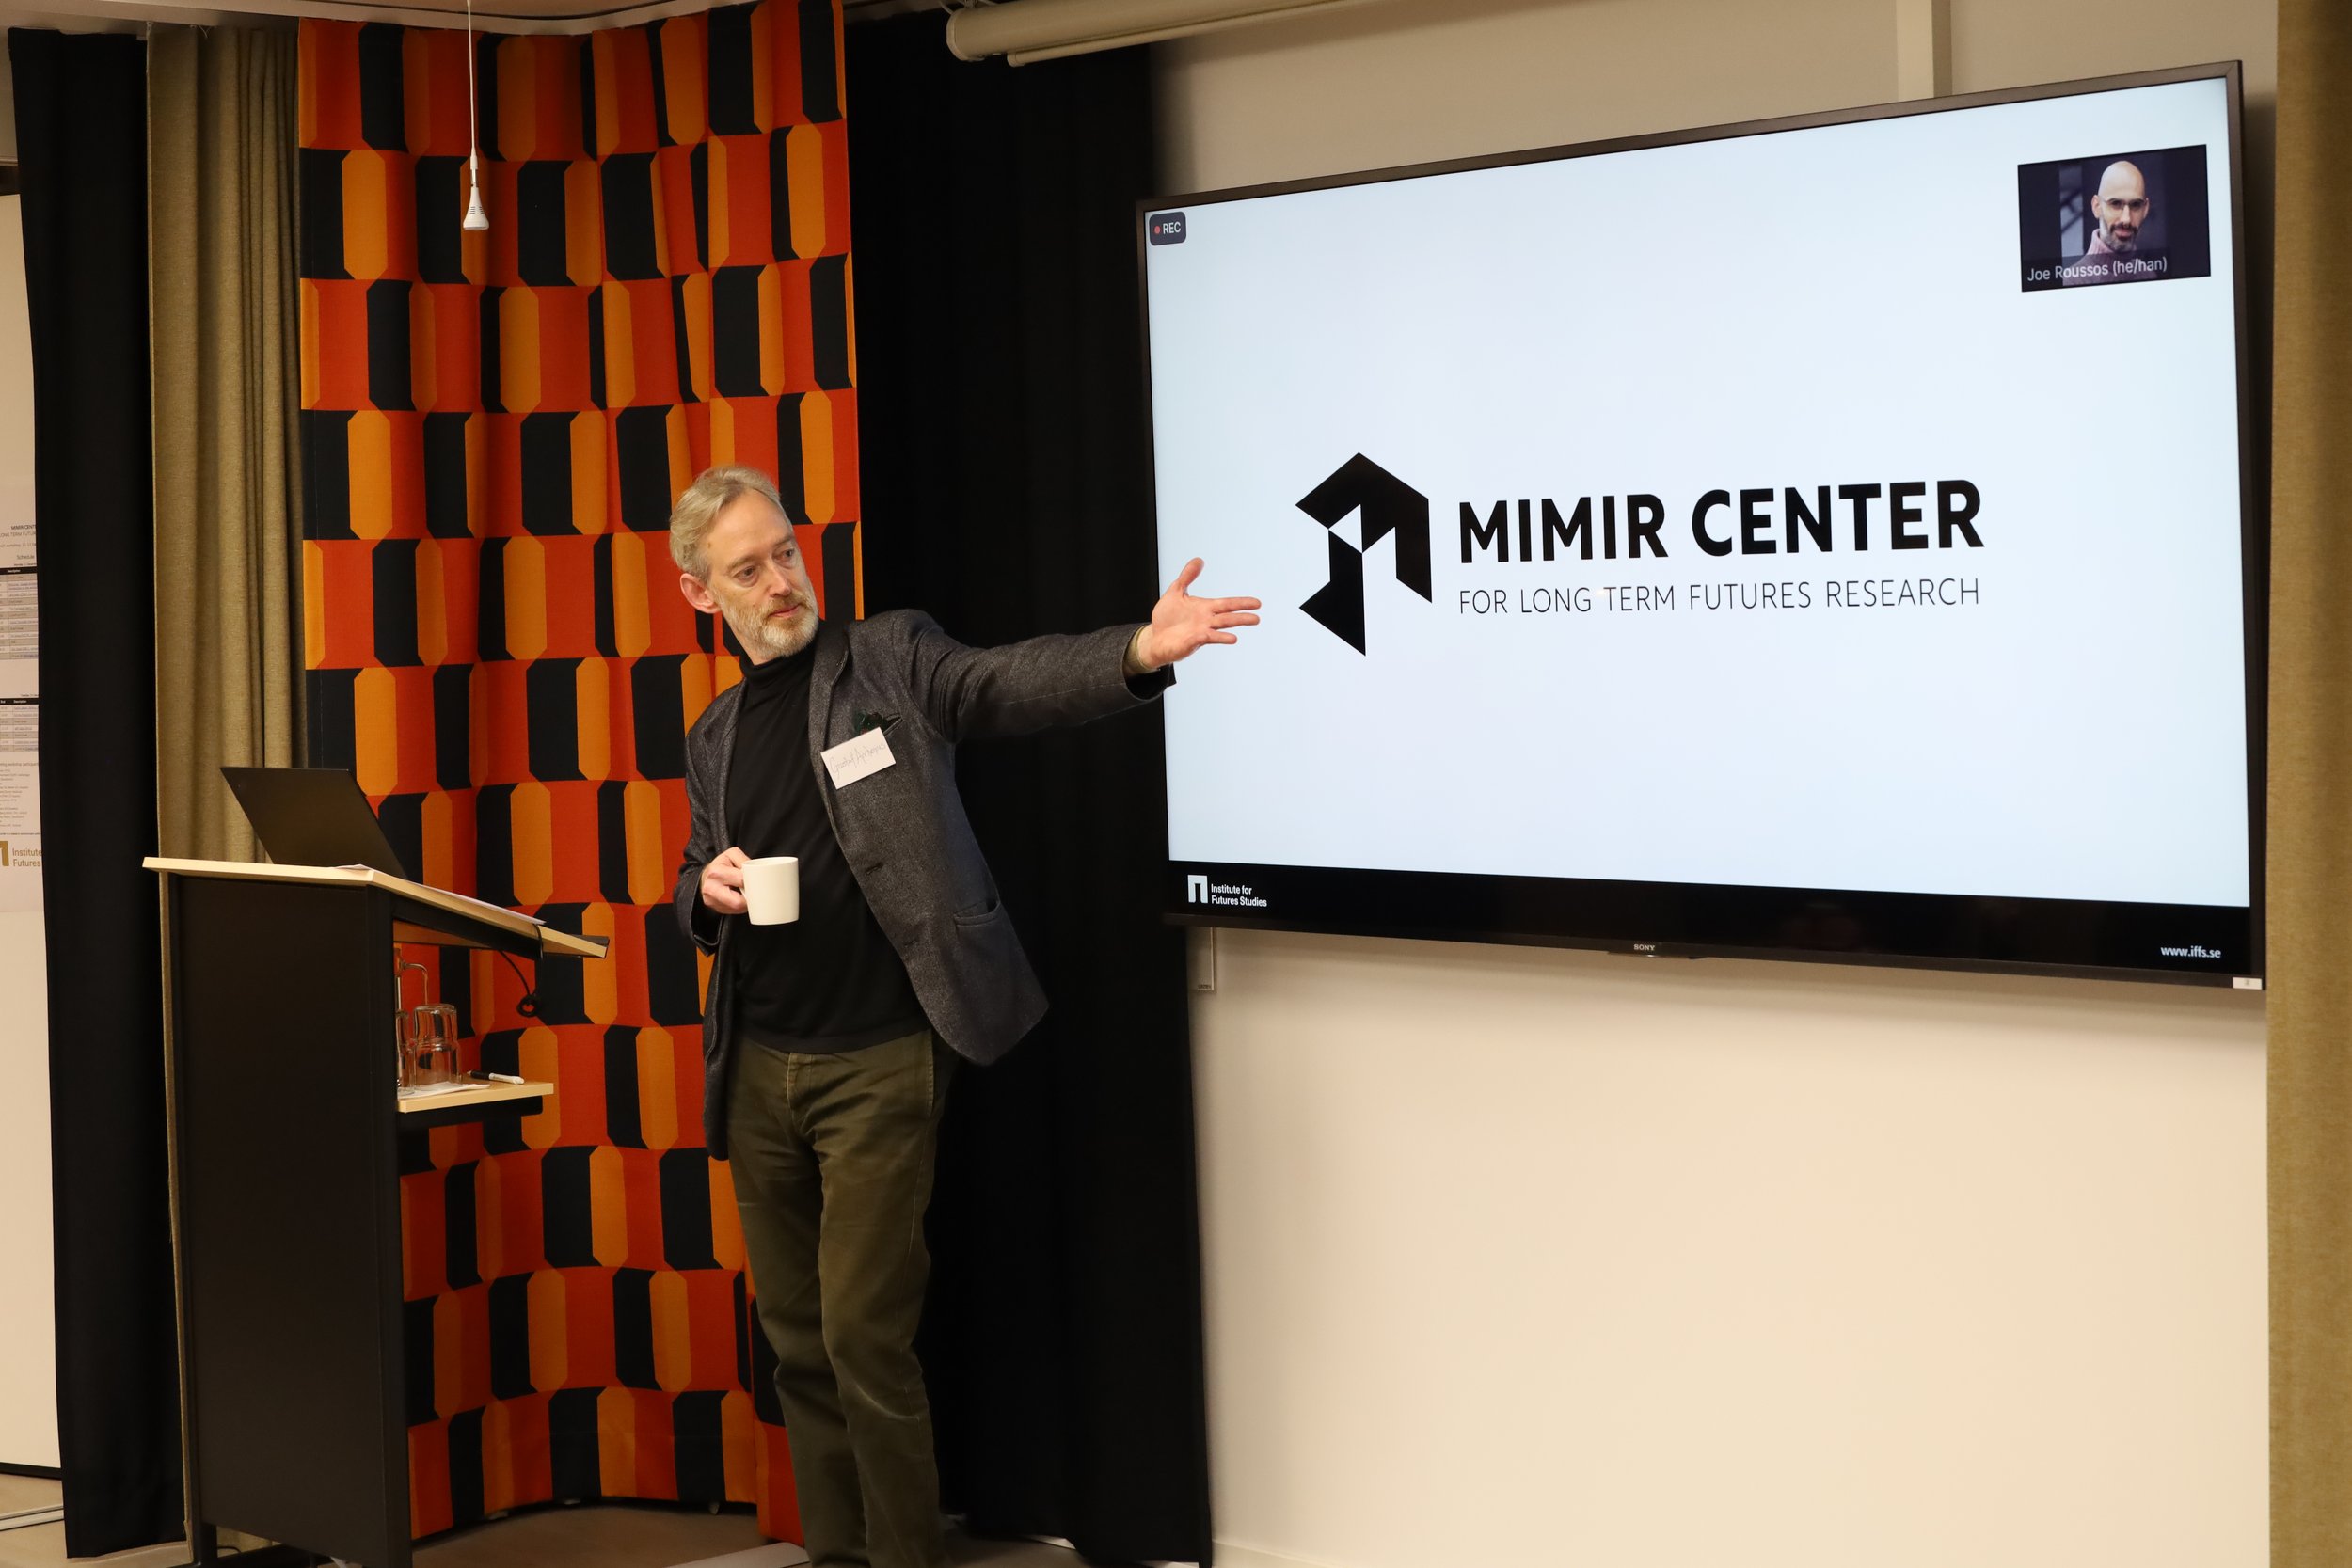   Gustaf Arrhenius , director of the Institute for Futures Studies and member of the Mimir Center, opens the workshop by wishing everybody welcome and introducing Karim Jebari. 